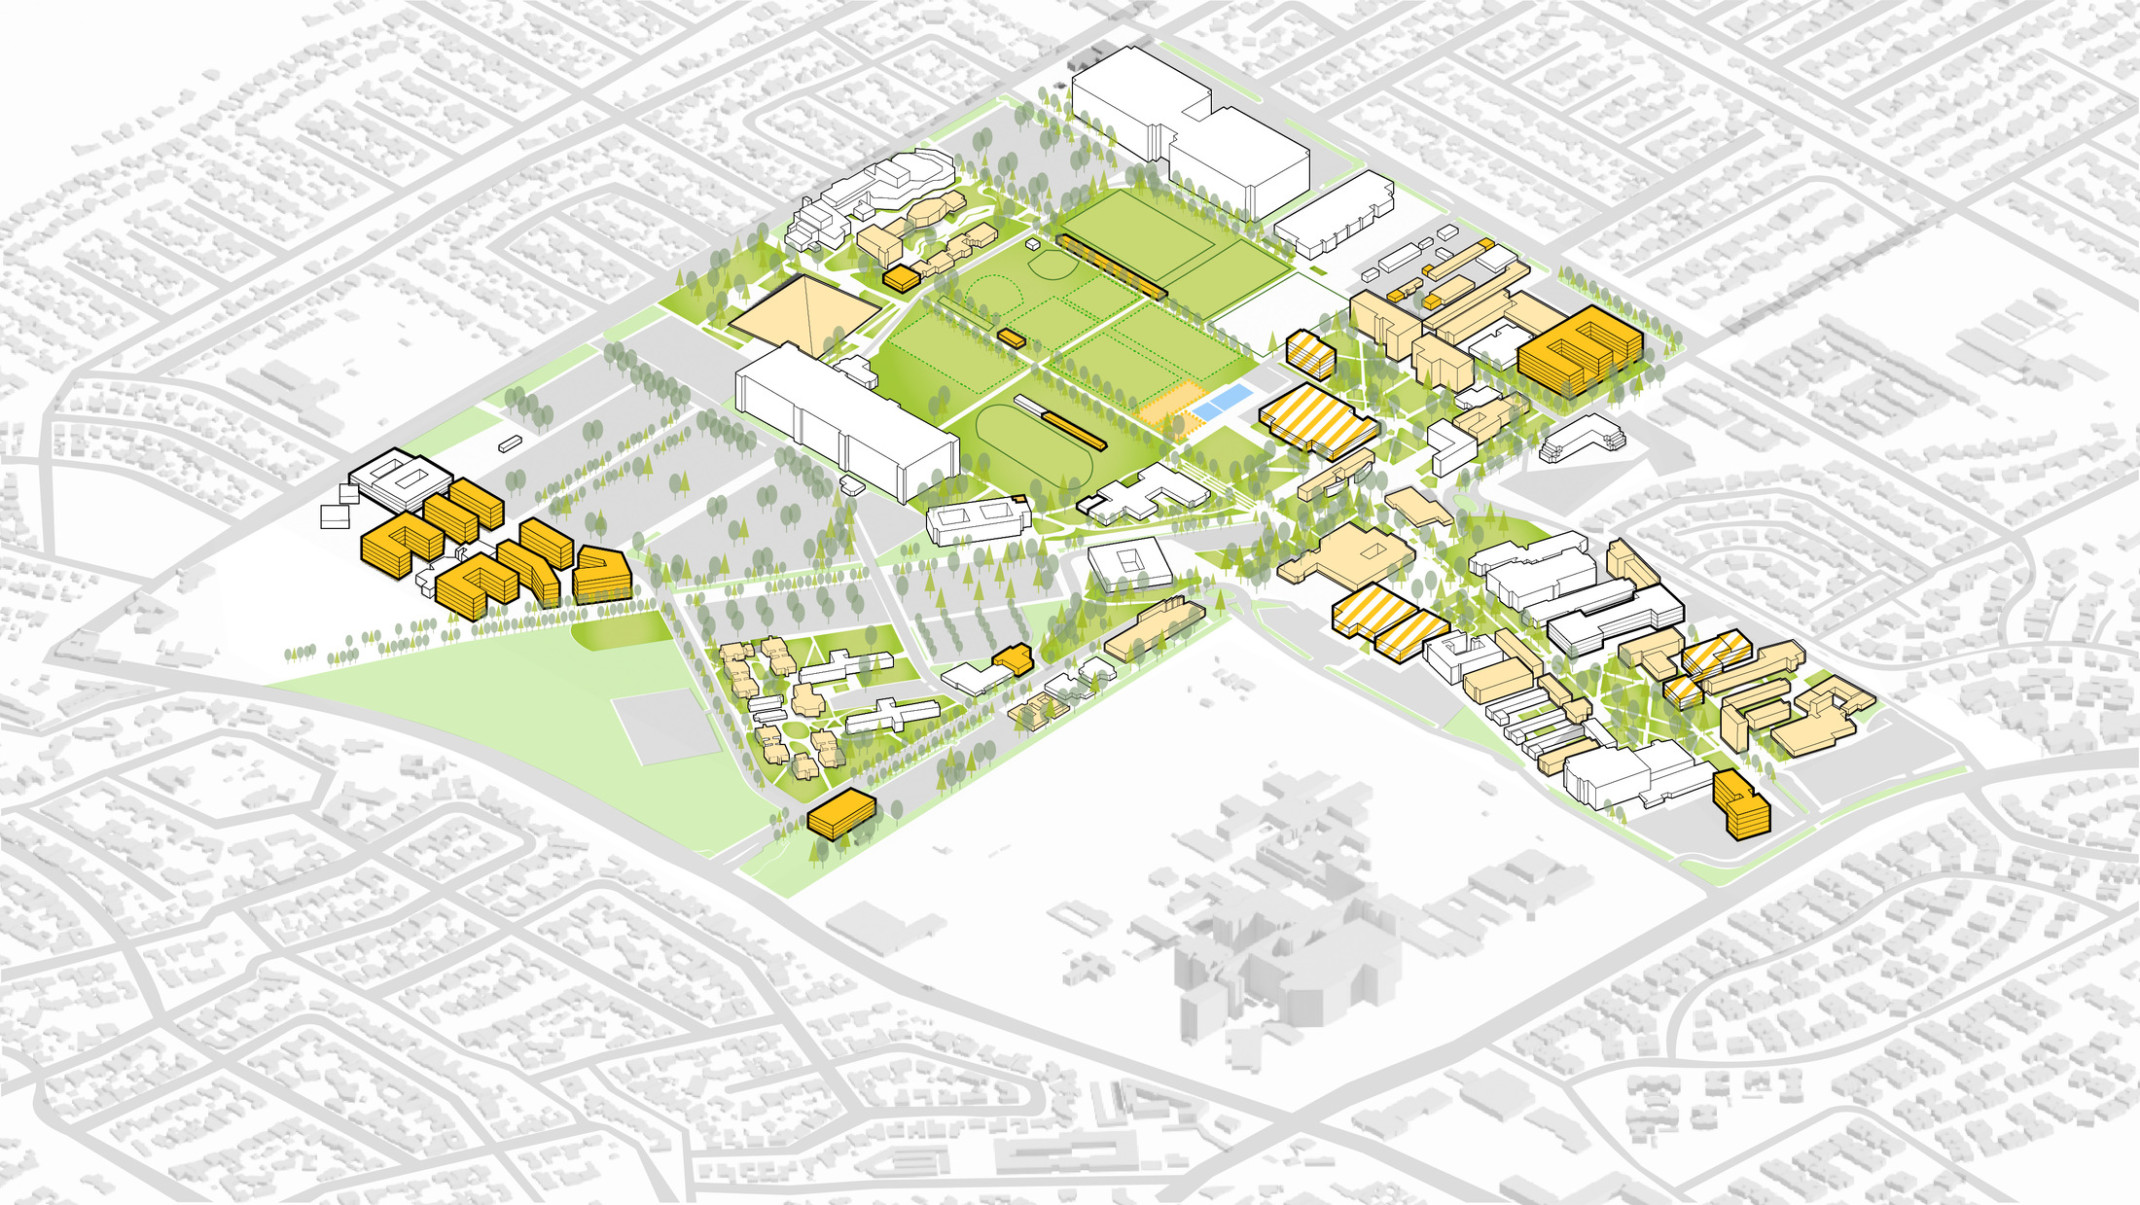 California State University Long Beach, animated aerial map, green space, building models, future planning, campus vision plan, higher education, phased construction, wellness